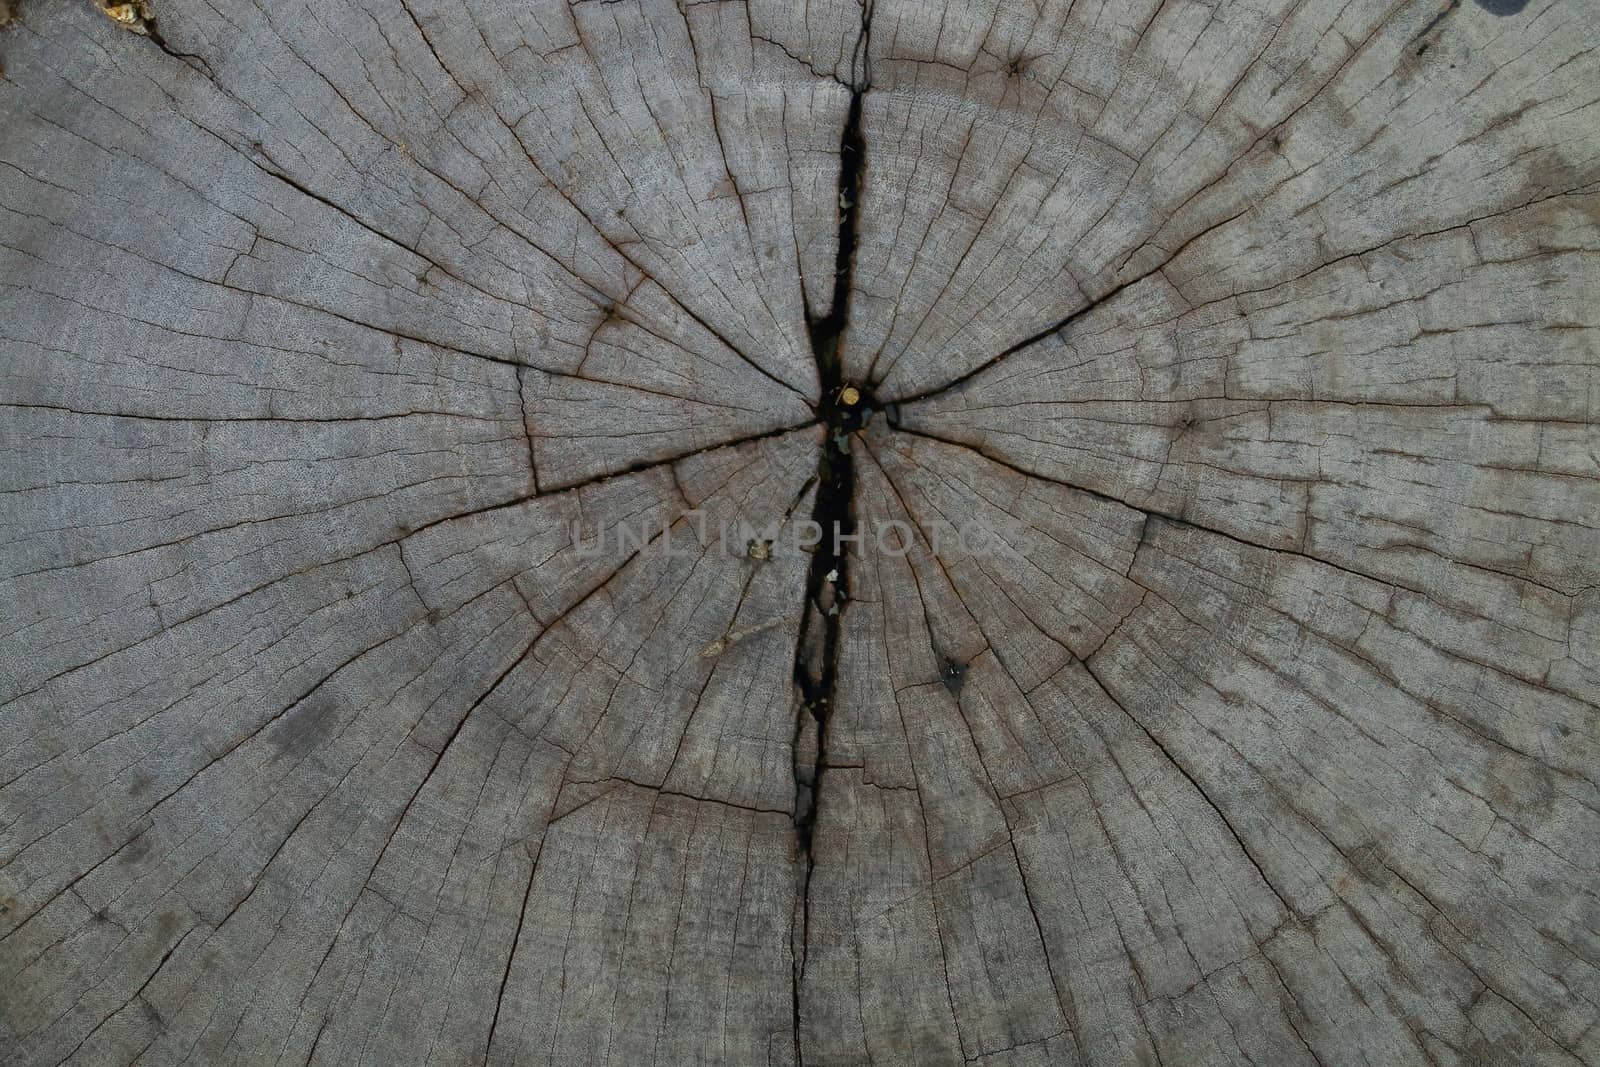 The surface of tree cut made be a chair.